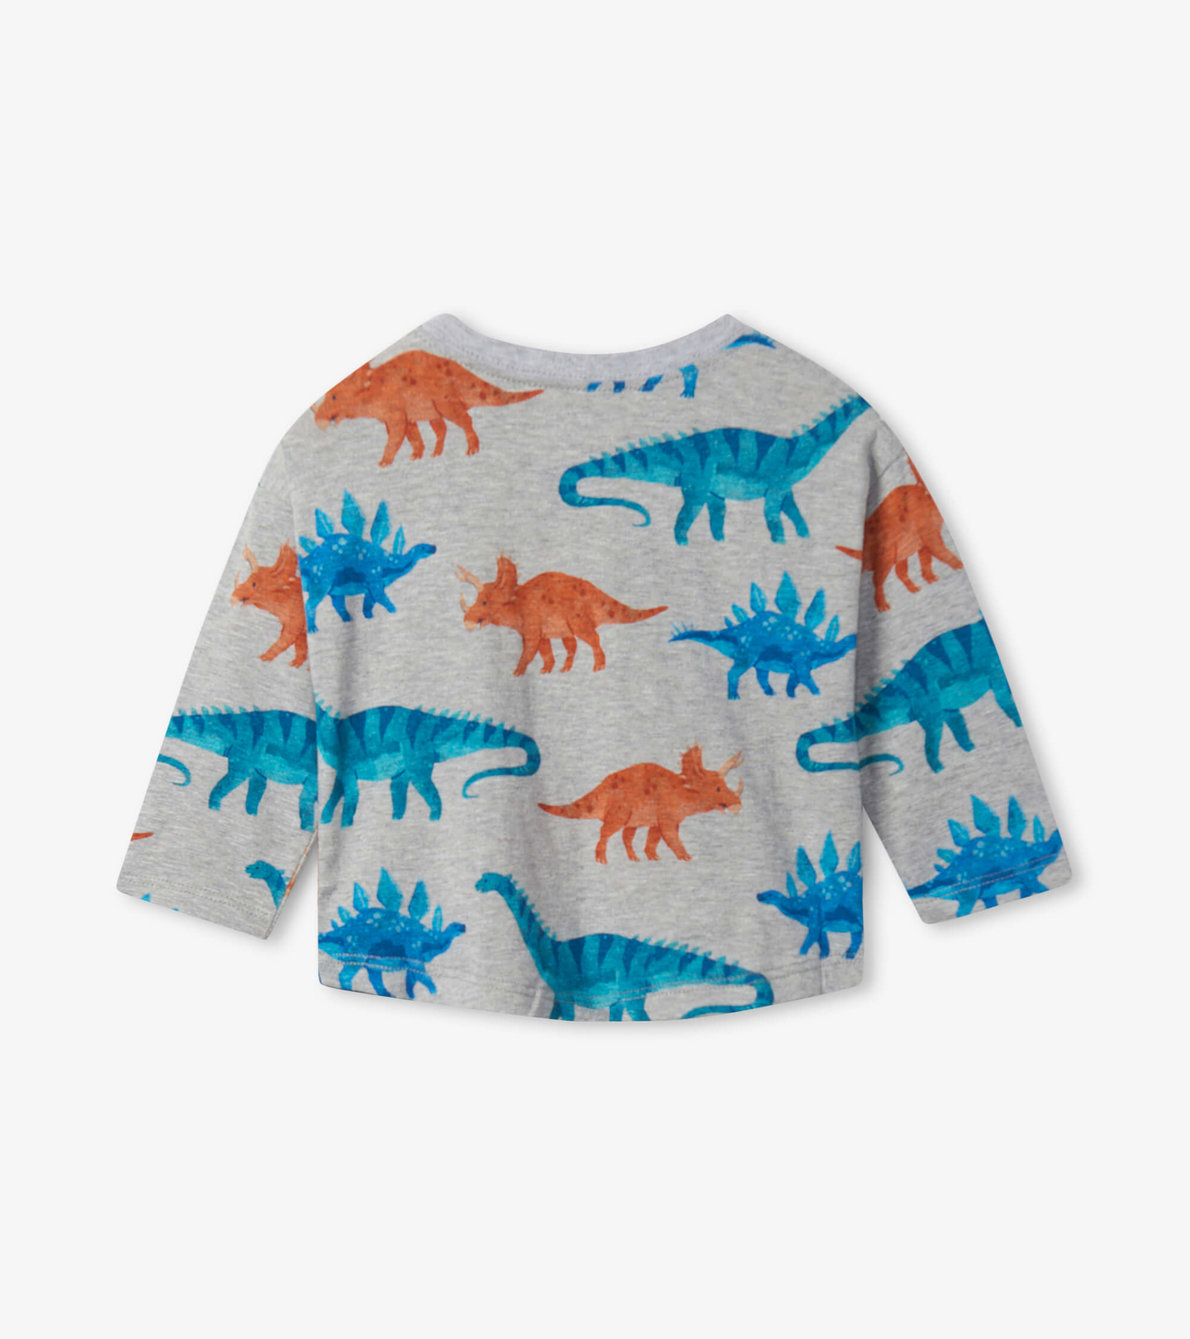 View larger image of Roaming Dinos Long Sleeve Baby Tee